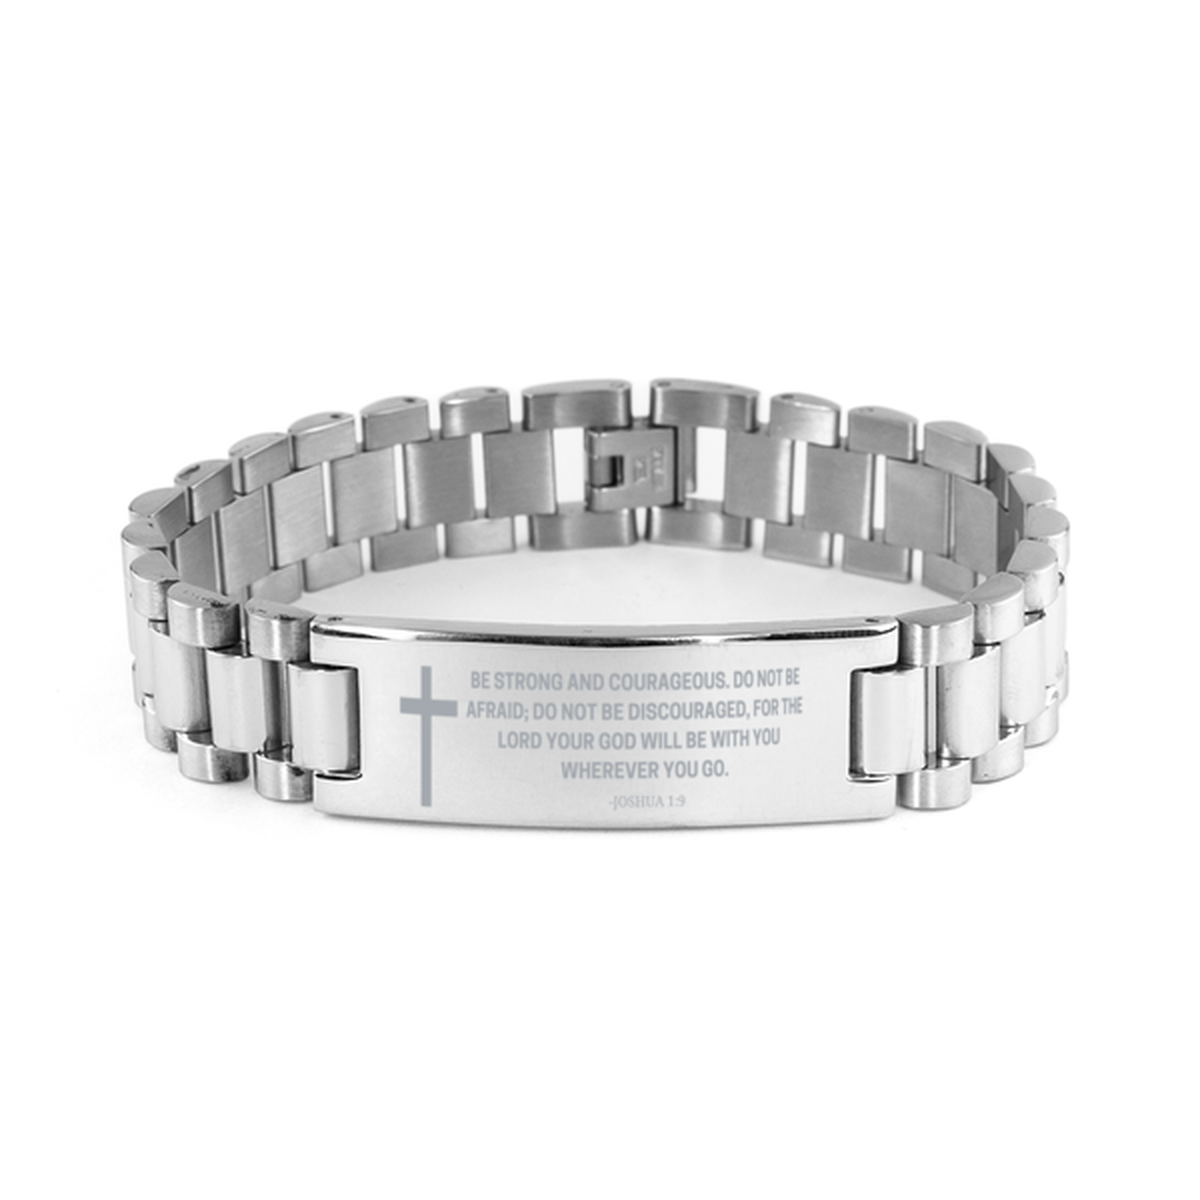 Baptism Gifts For Teenage Boys Girls, Christian Bible Verse Ladder Stainless Steel Bracelet, For the lord your God will be with you, Catholic Confirmation Gifts for Son, Godson, Grandson, Nephew